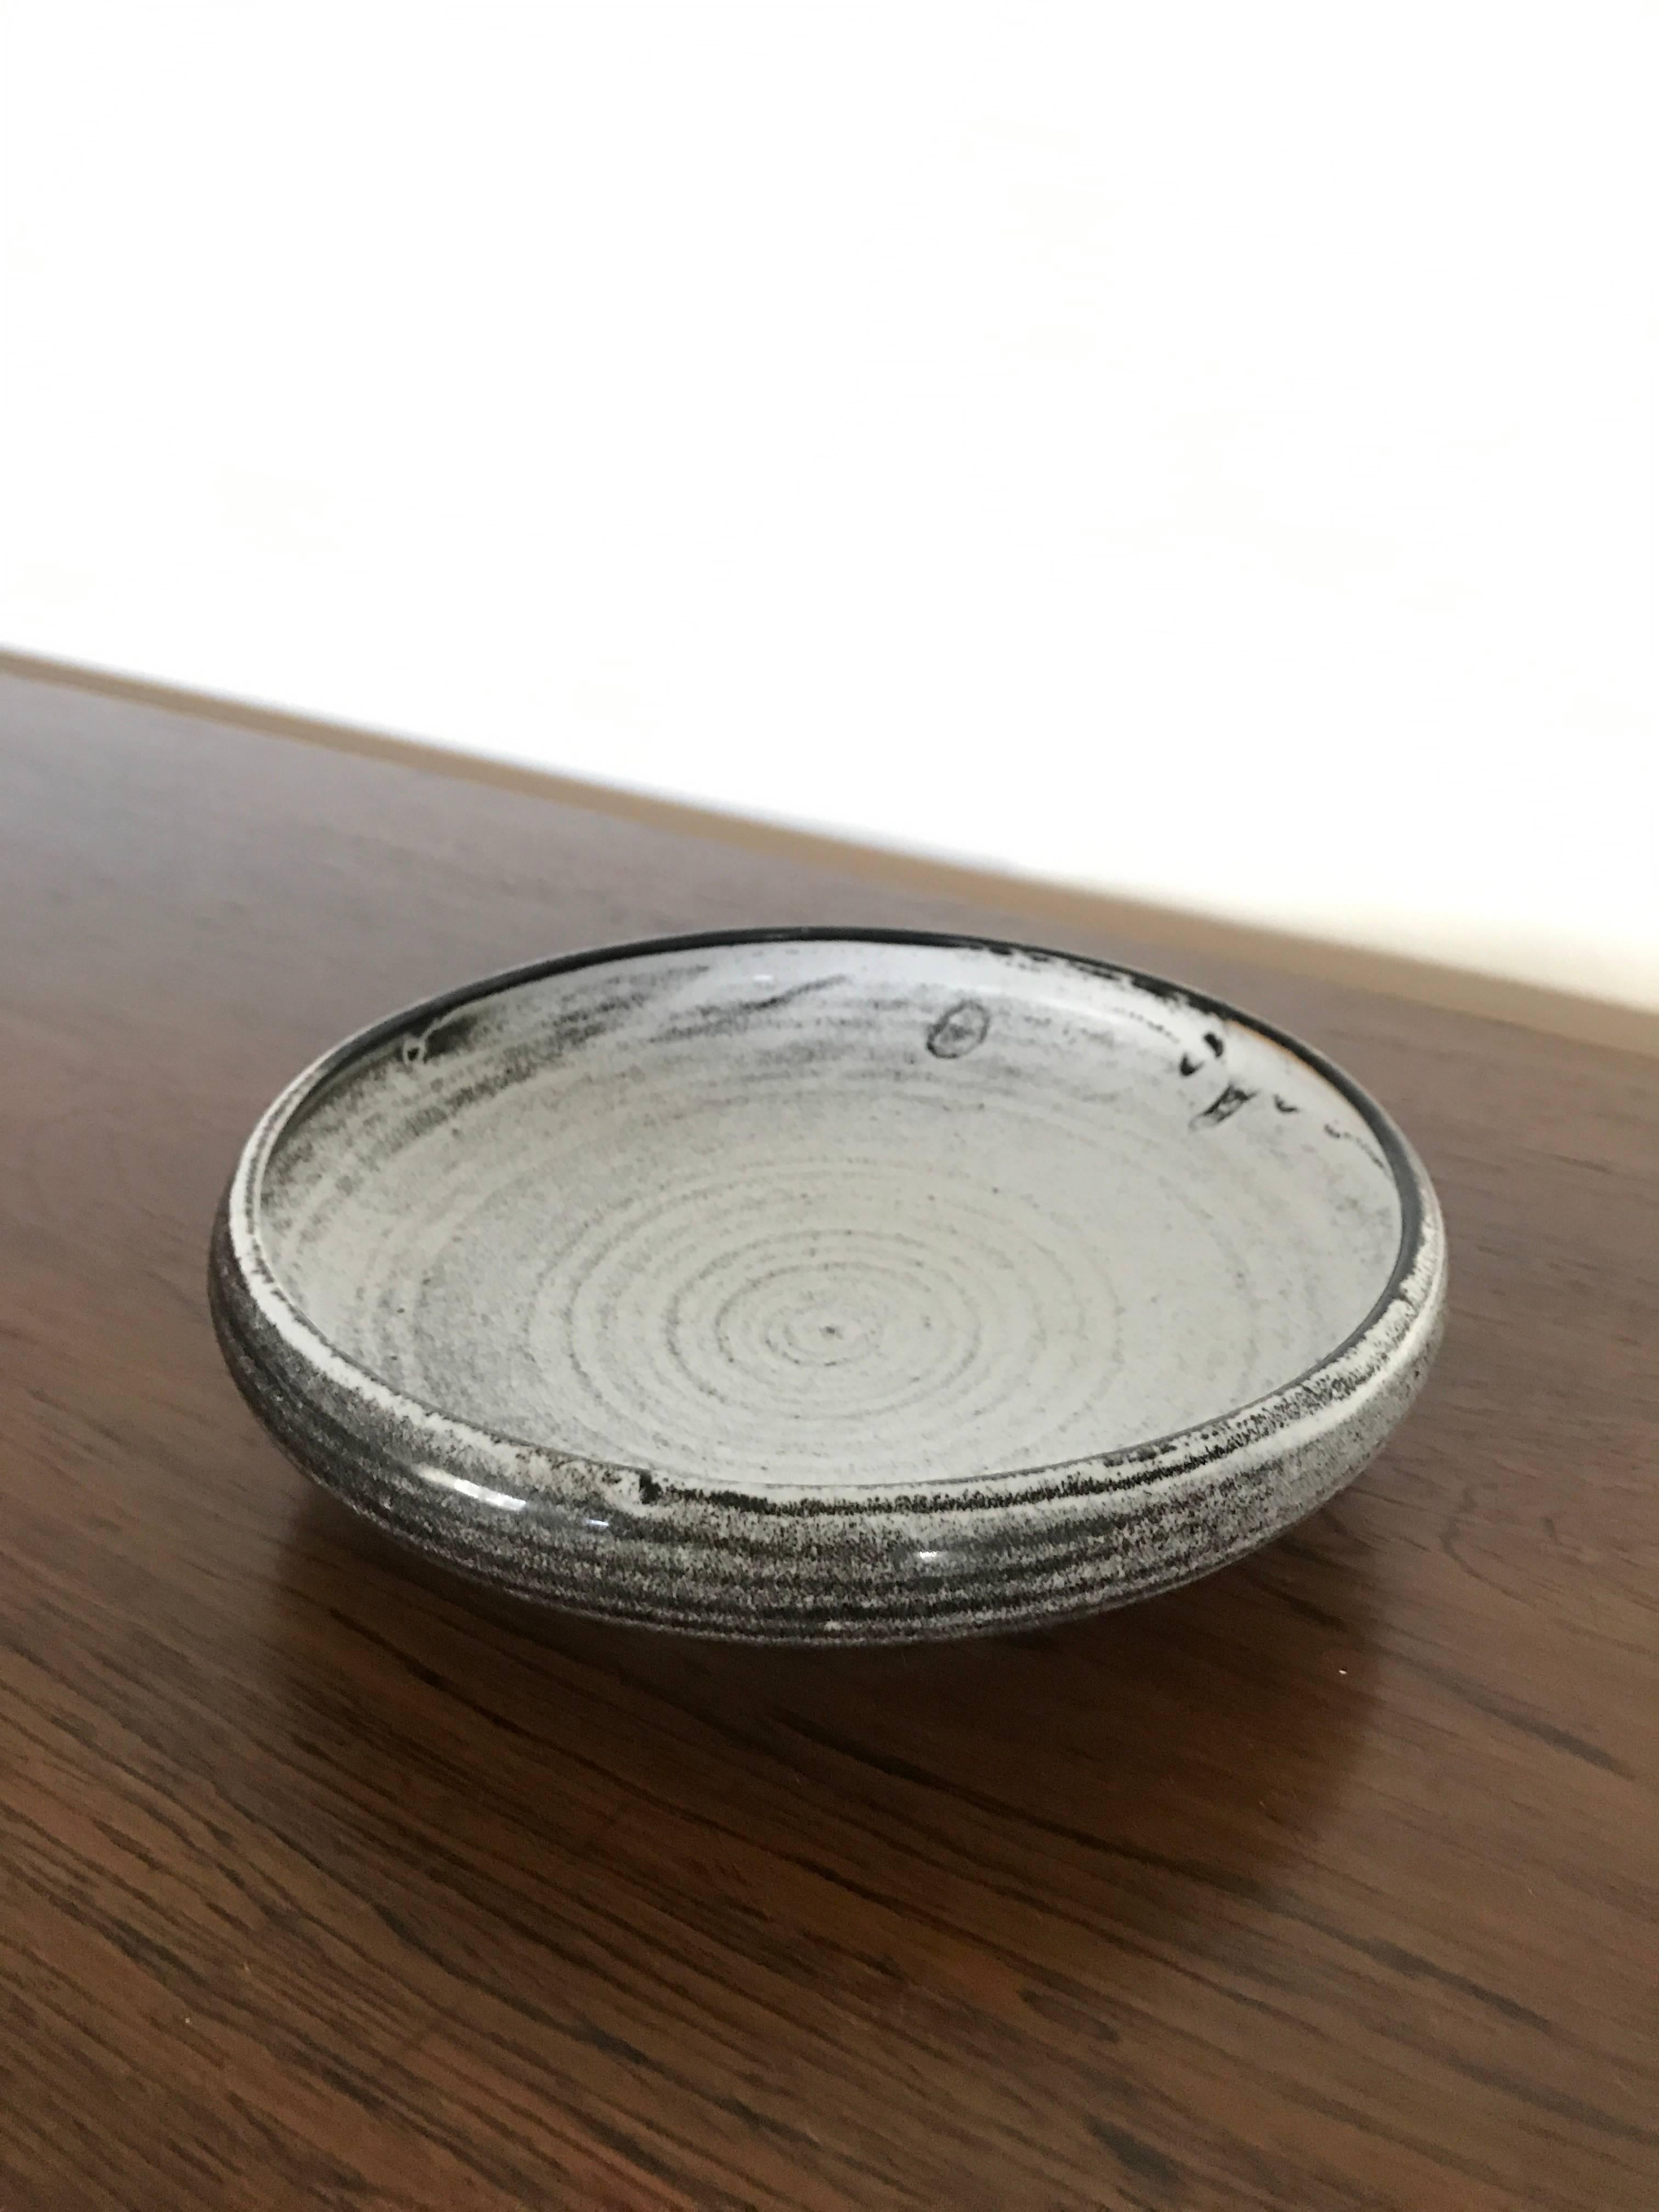 Glazed stoneware dish from Kähler, designed by Svend Hammershøi in black and grey glaze, also called ash glaze, from the 1930s in Denmark. Measures: Diameter 17 cm, and height 5 cm. and in very good condition.